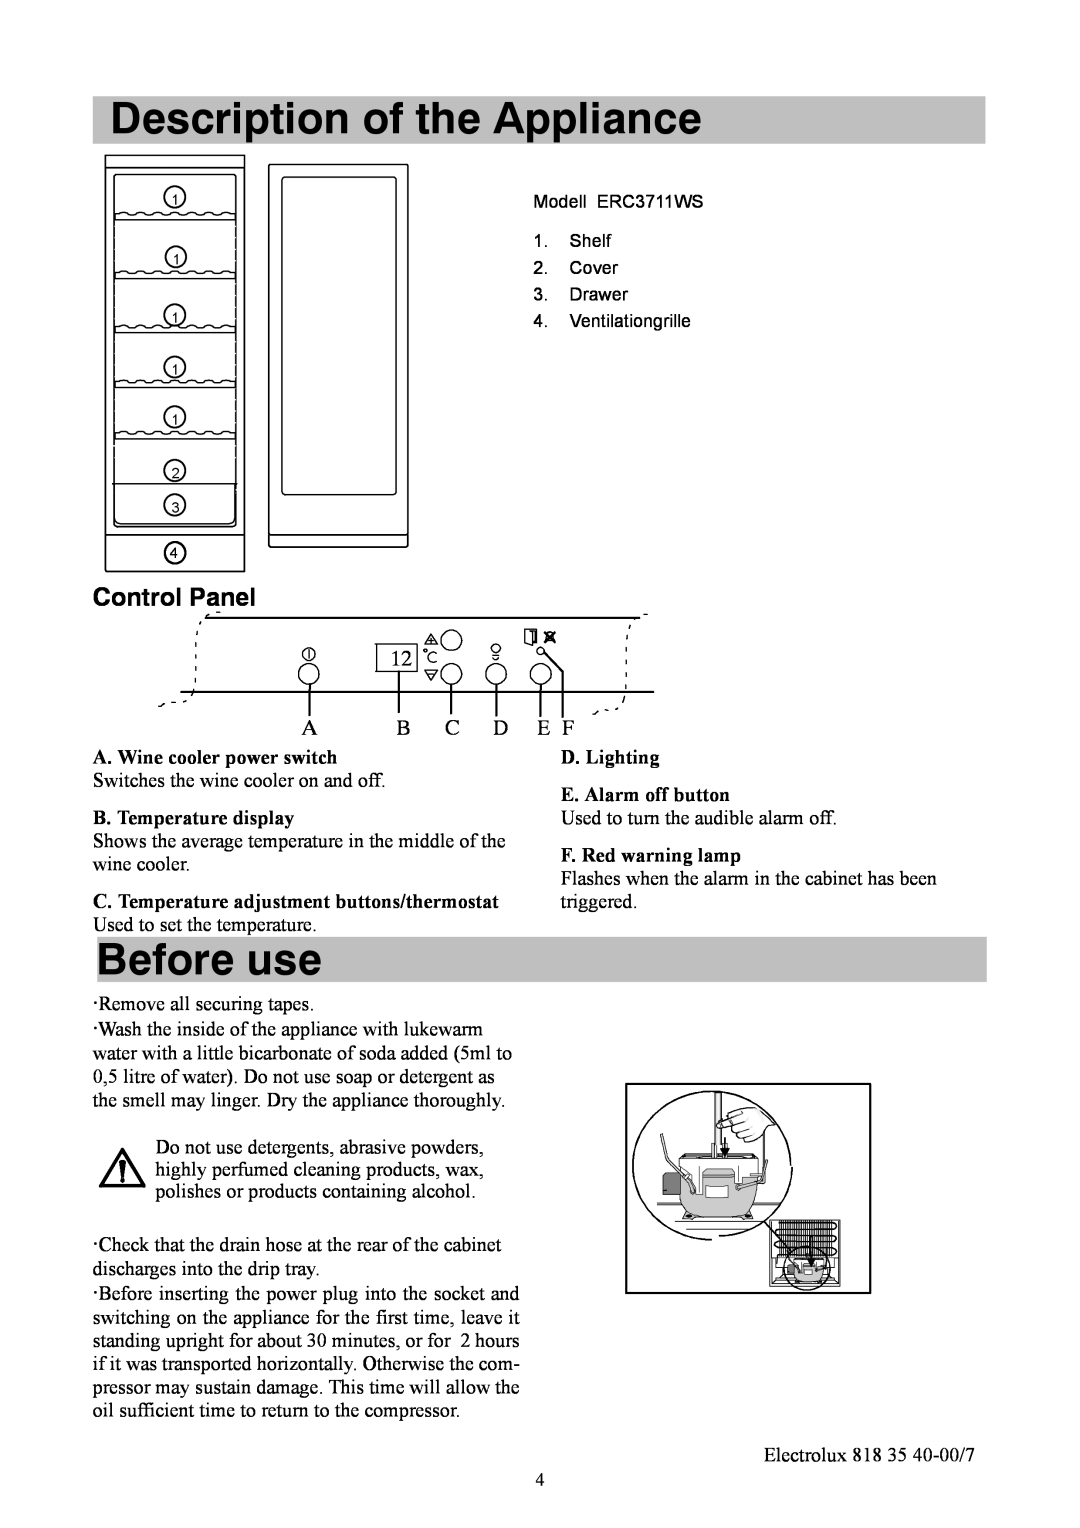 Electrolux ERC3711WS Description of the Appliance, Before use, Control Panel, A. Wine cooler power switch, A B C D E F 